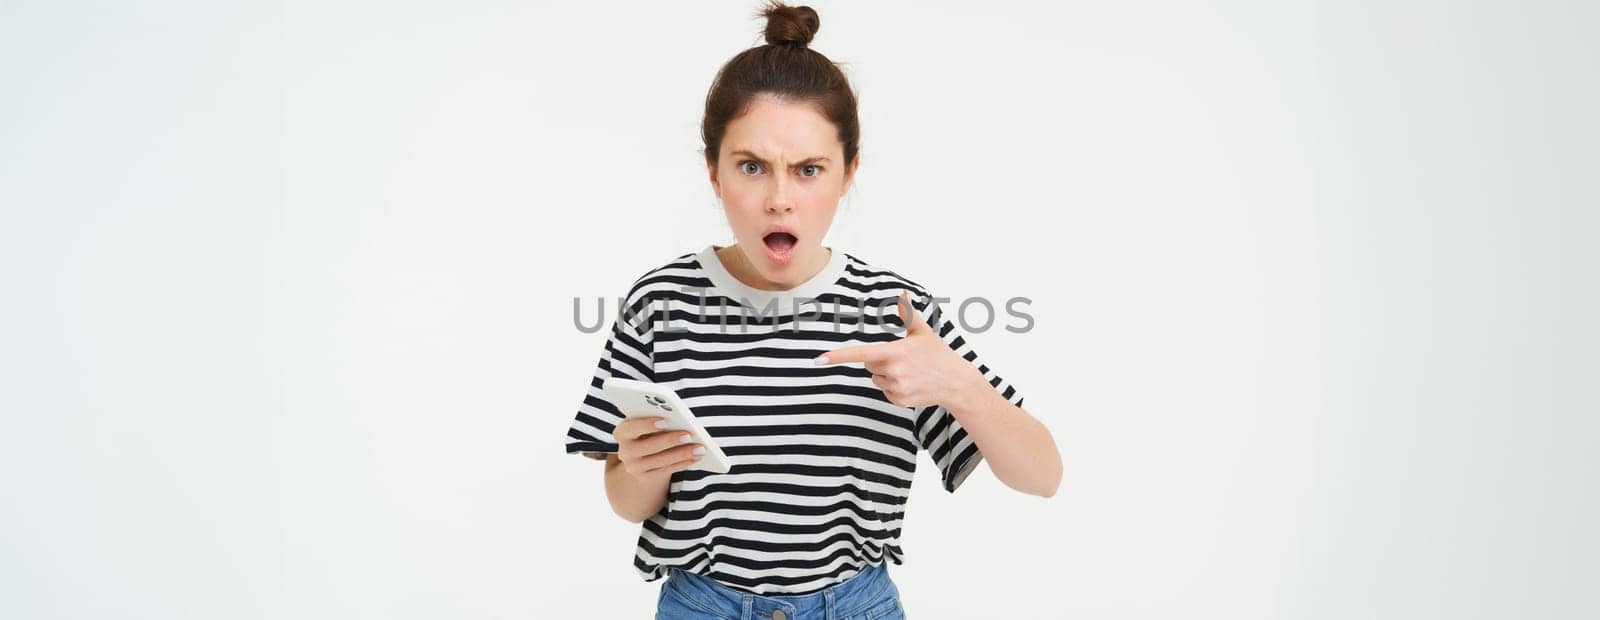 Angry woman complaining, pointing at smartphone and shouting with frustrated face expression, isolated over white background.